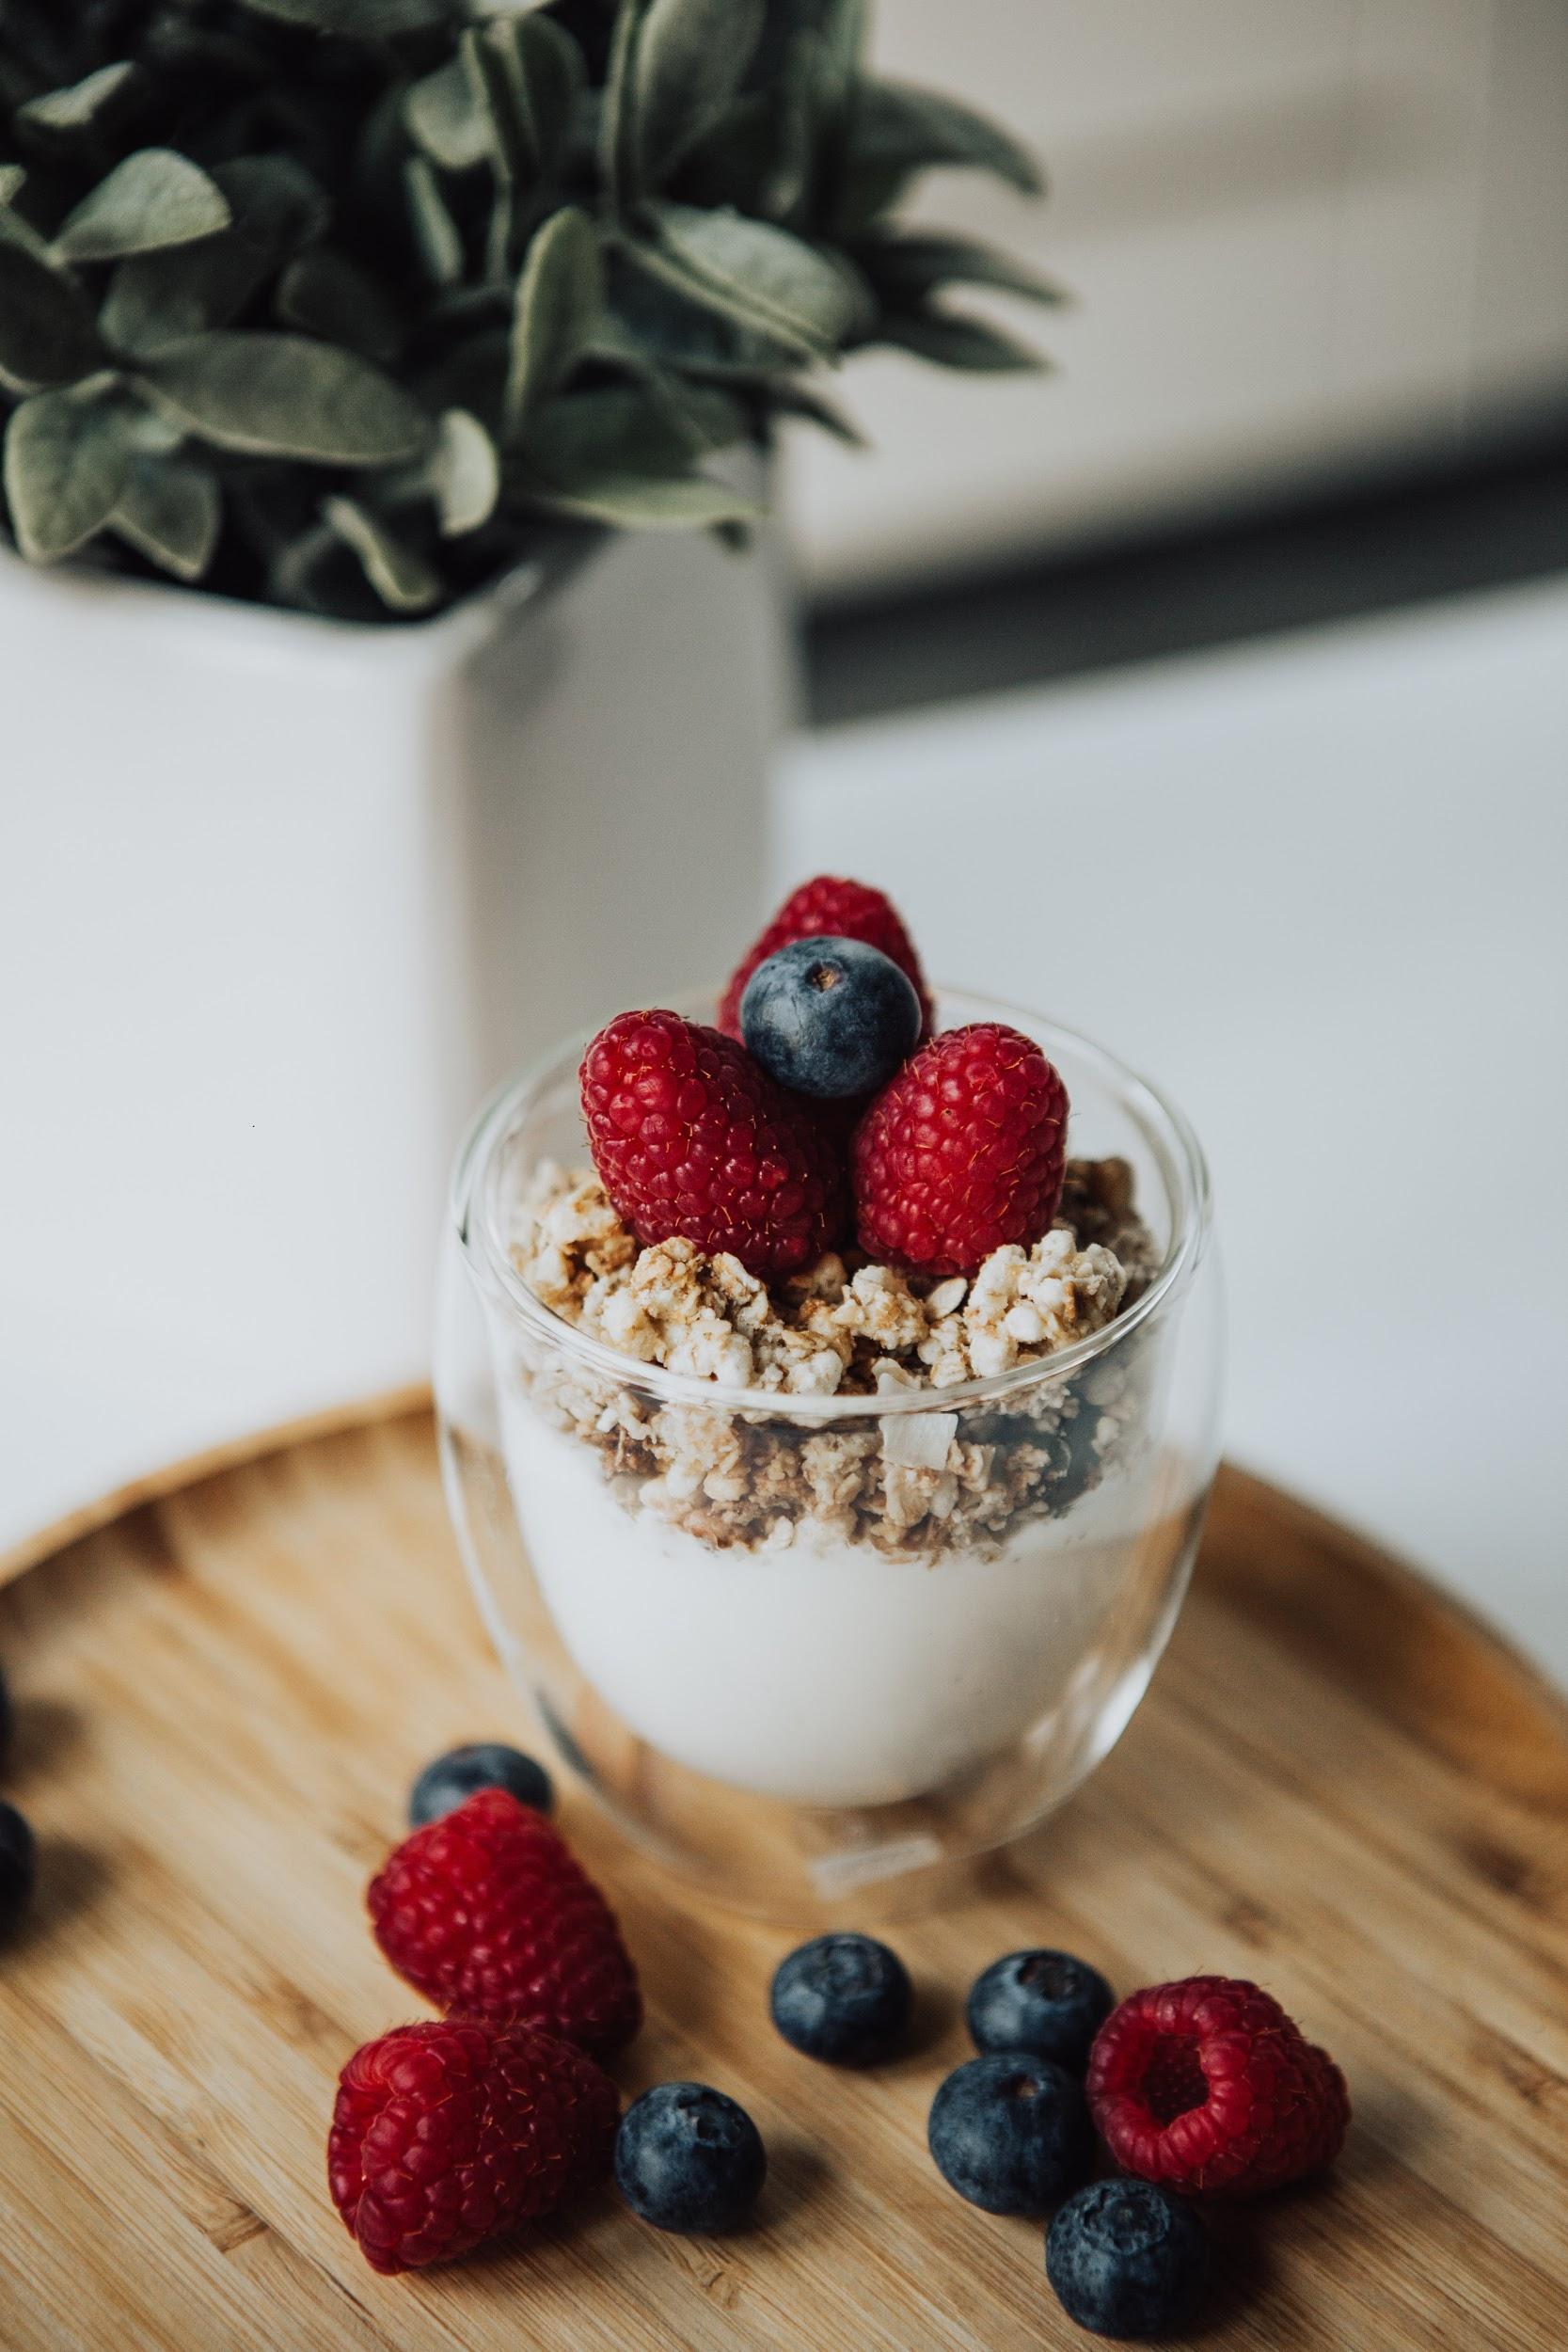 A yogurt parfait with granola and fresh berries in a clear glass is shown sitting on a table